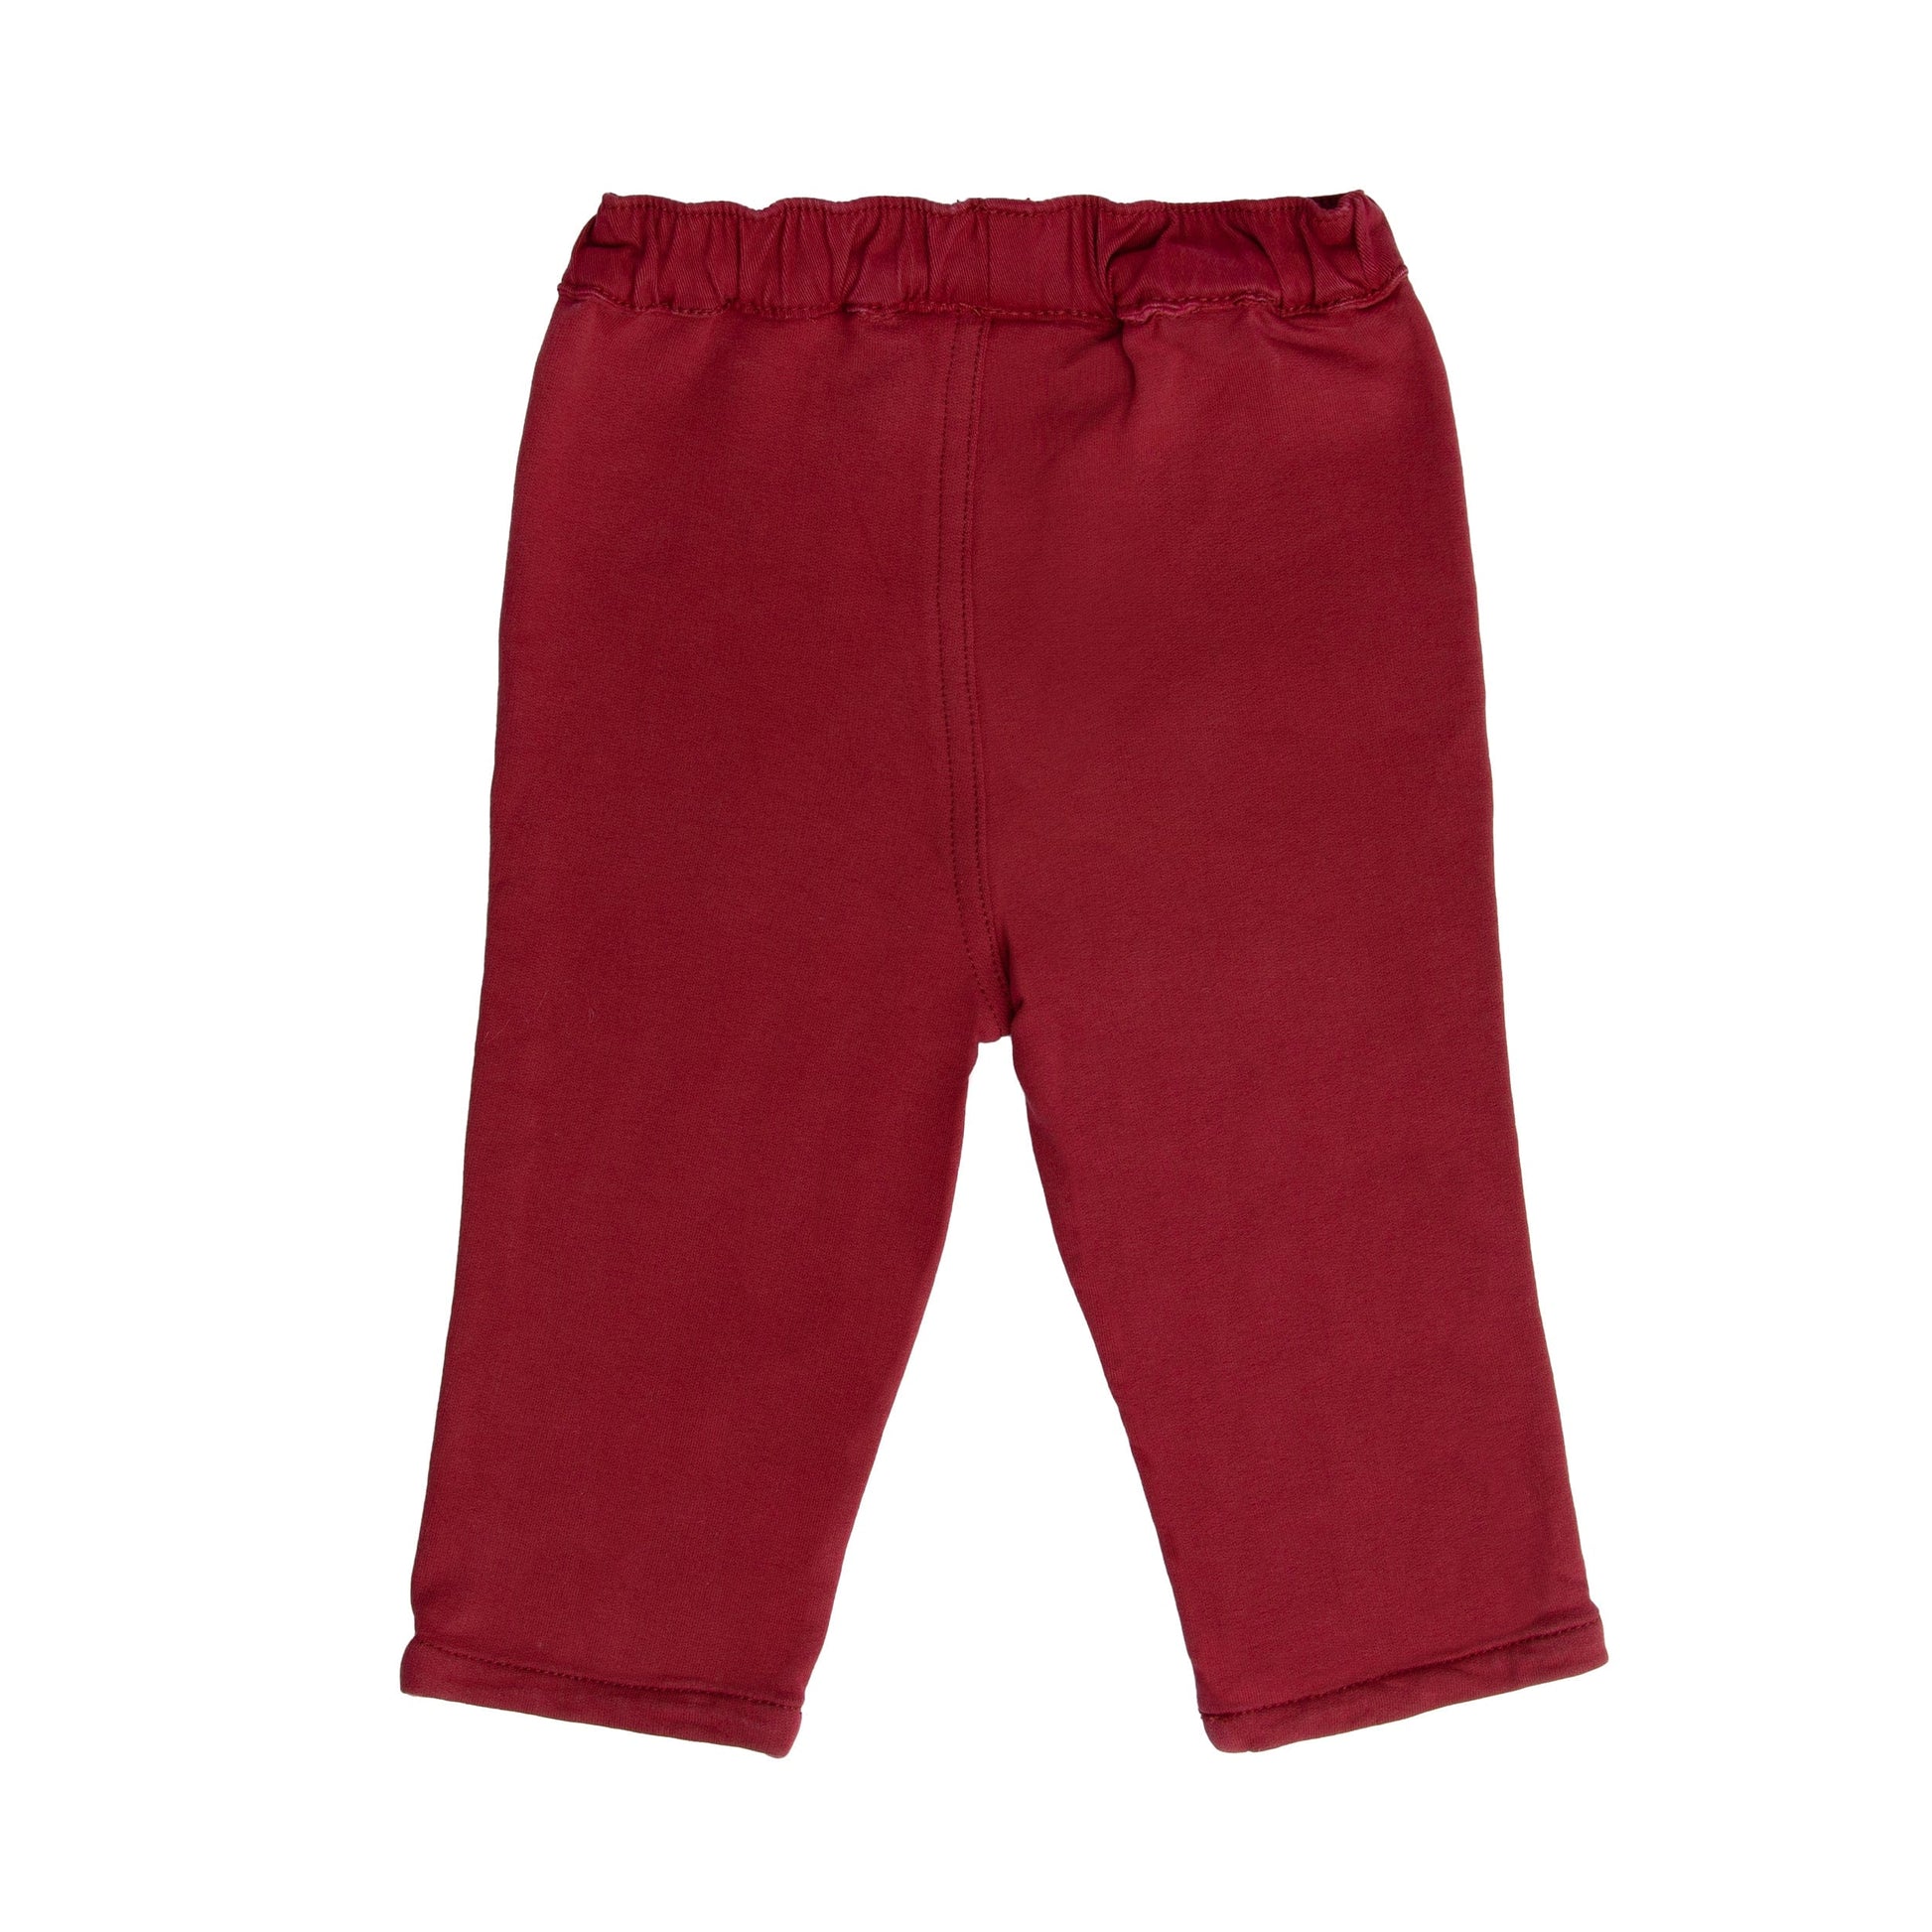 Noukie's Bottoms Burgundy trousers